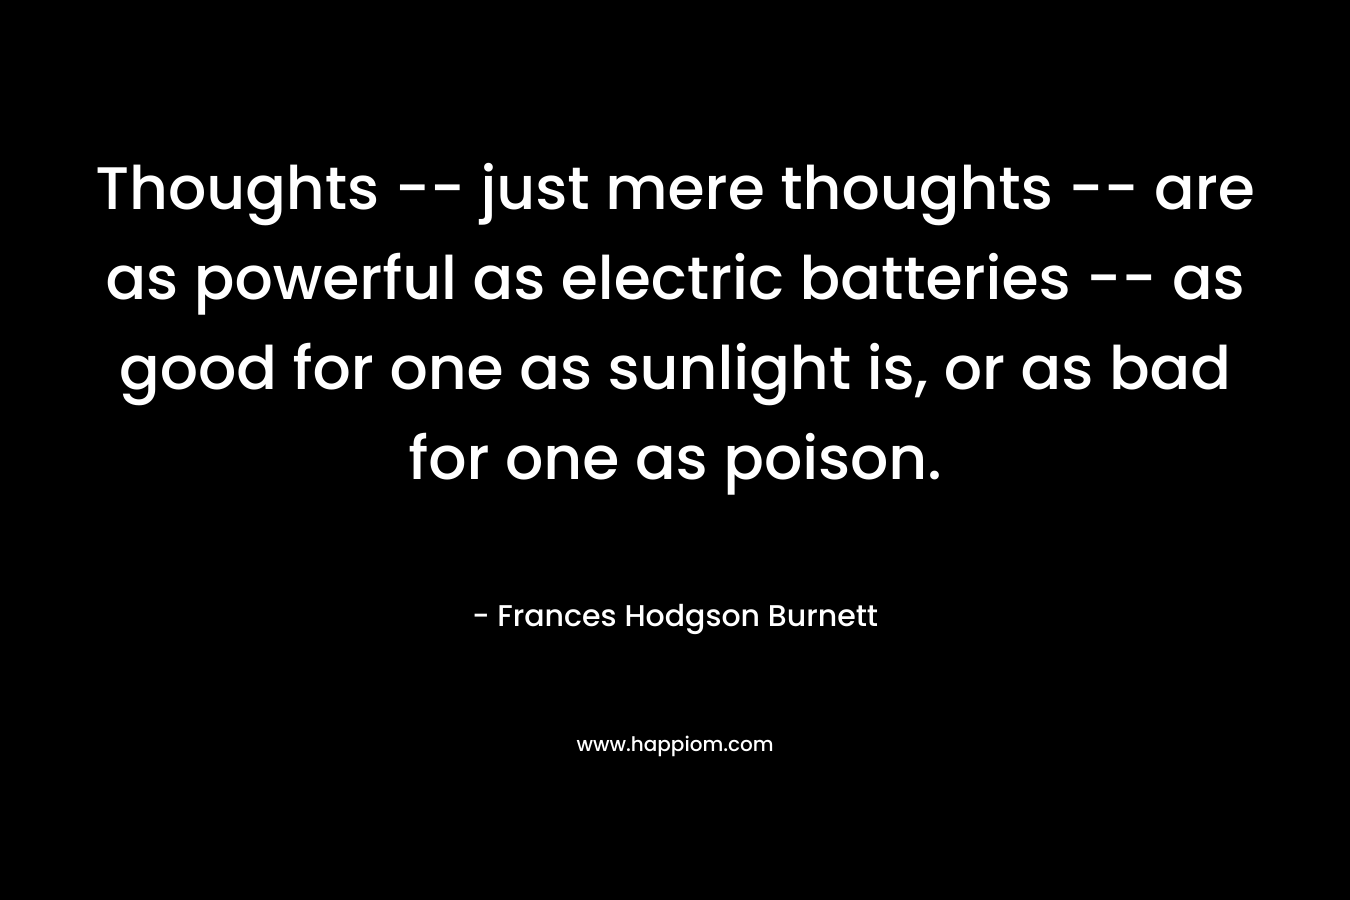 Thoughts — just mere thoughts — are as powerful as electric batteries — as good for one as sunlight is, or as bad for one as poison. – Frances Hodgson Burnett